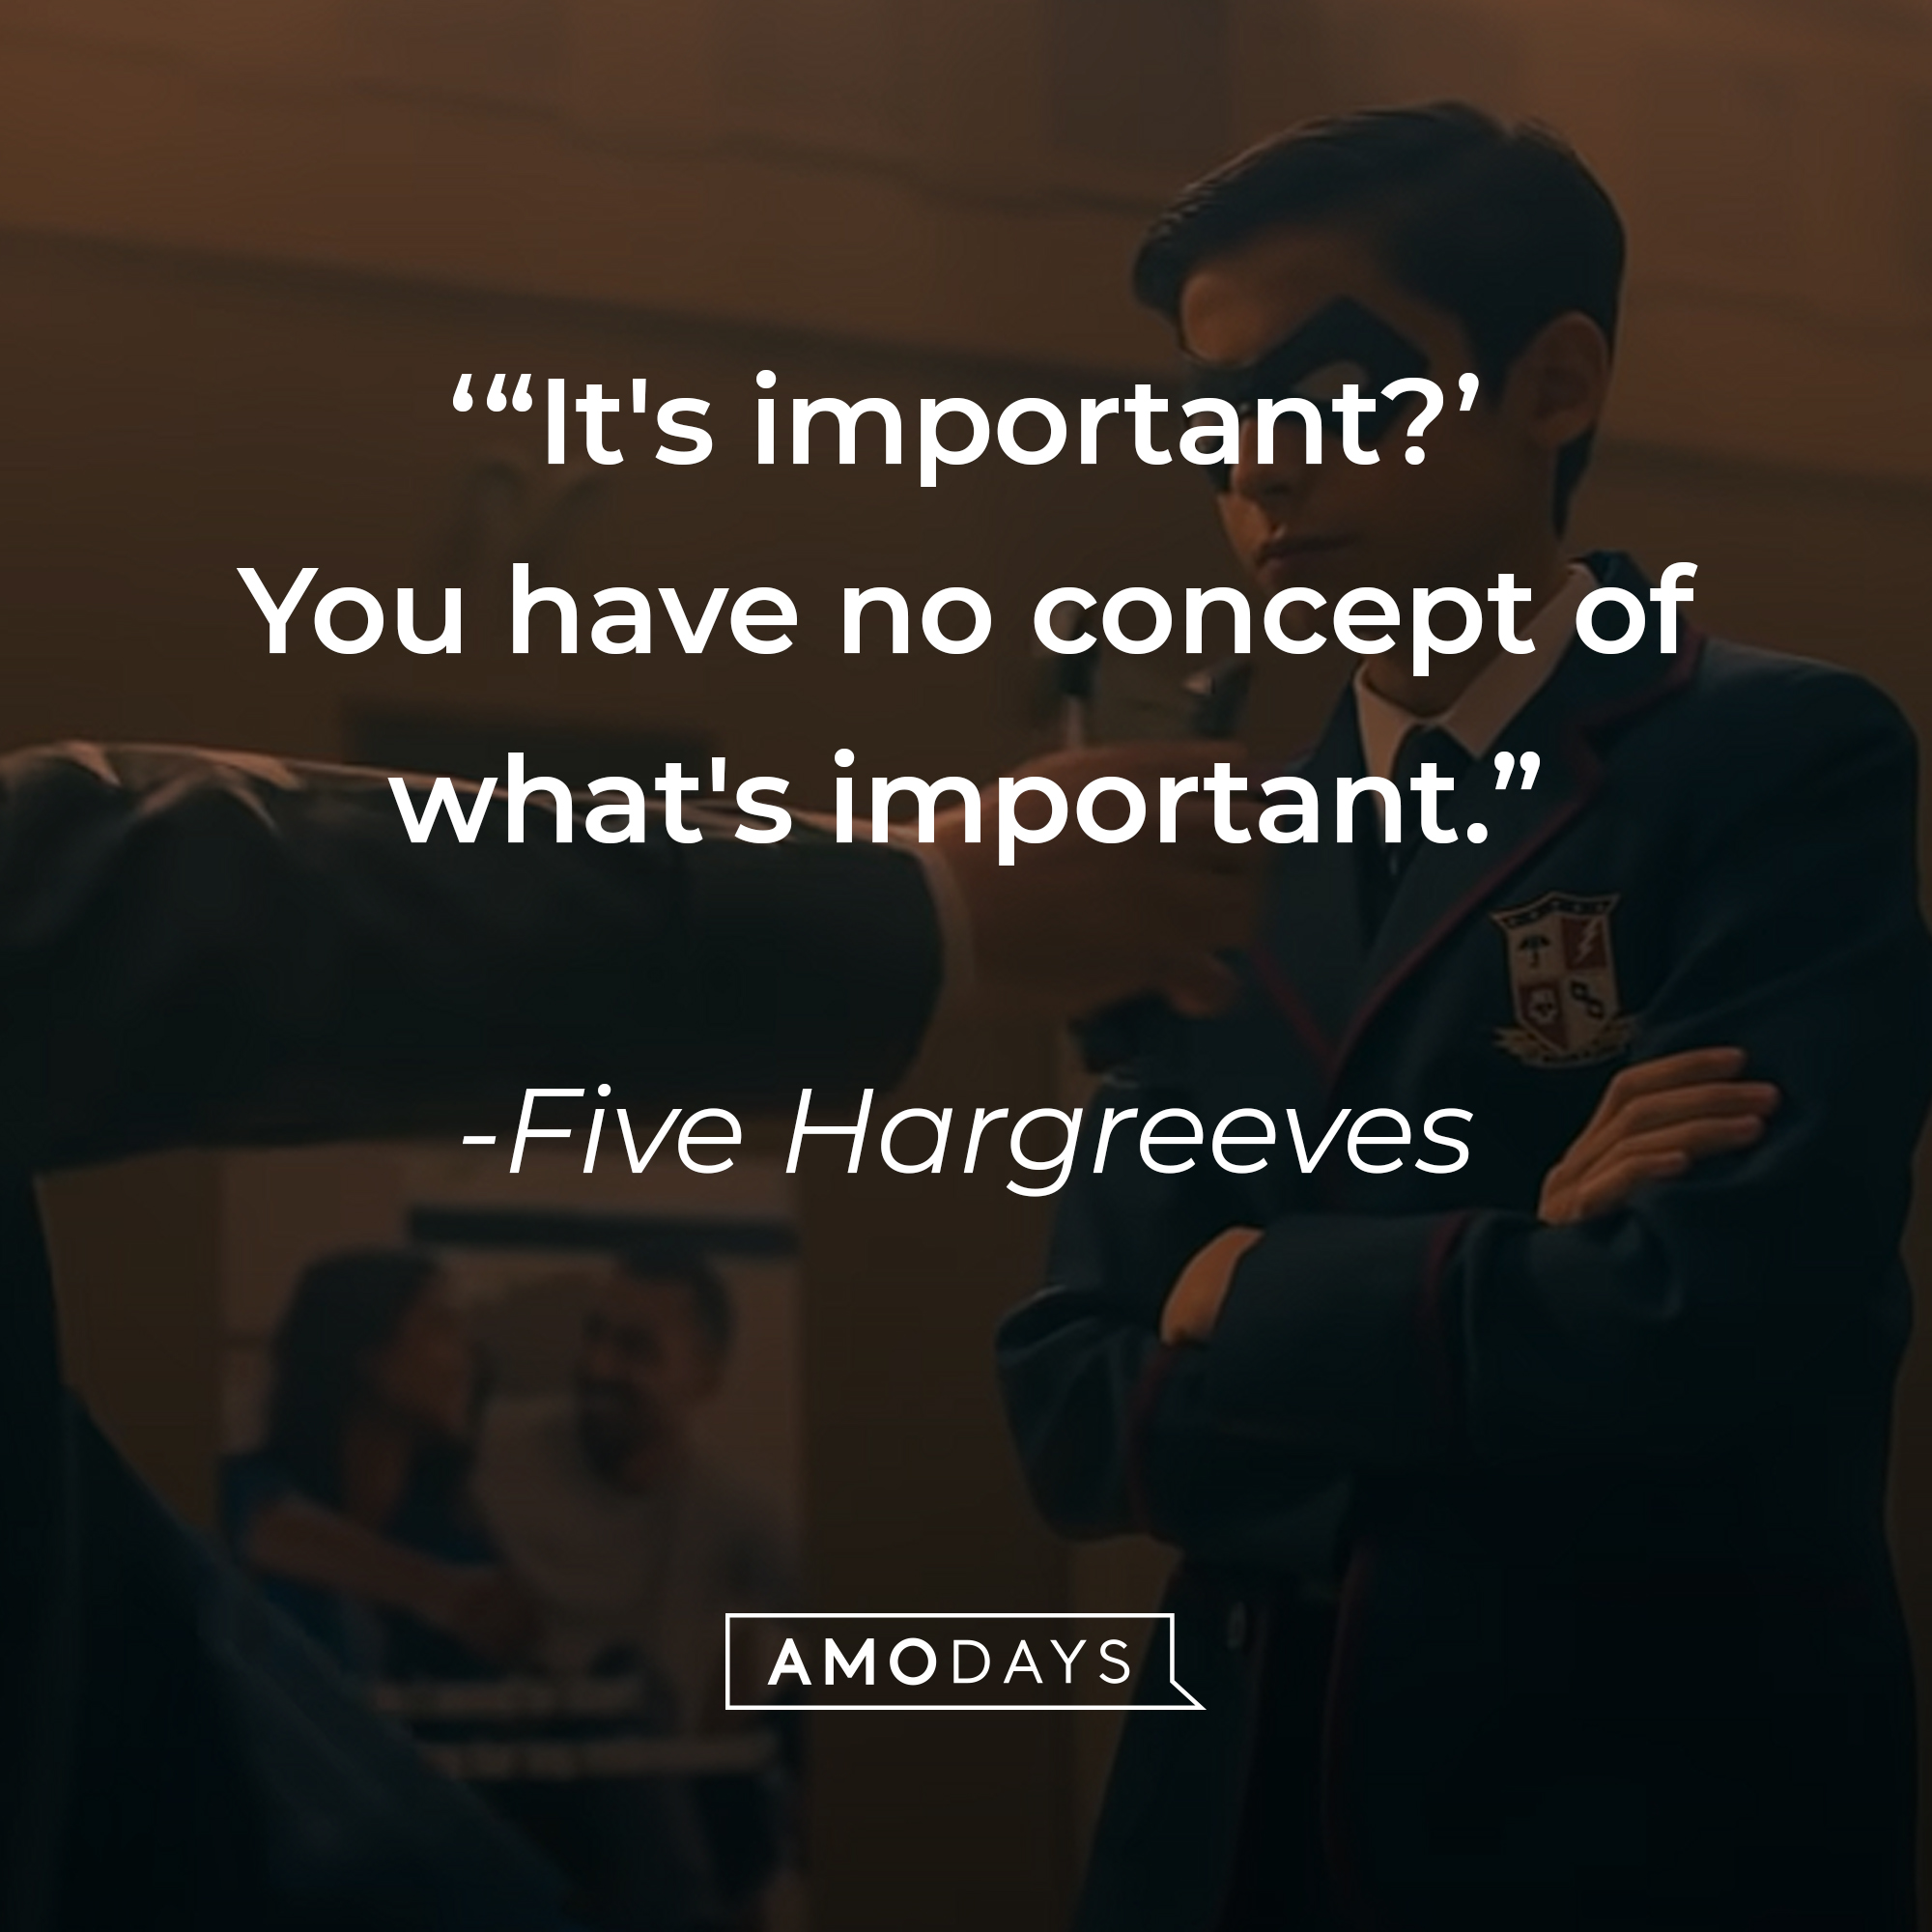 Five Hargreeves’ quote: “It's important?" You have no concept of what's important.” | Source: youtube.com/Netflix